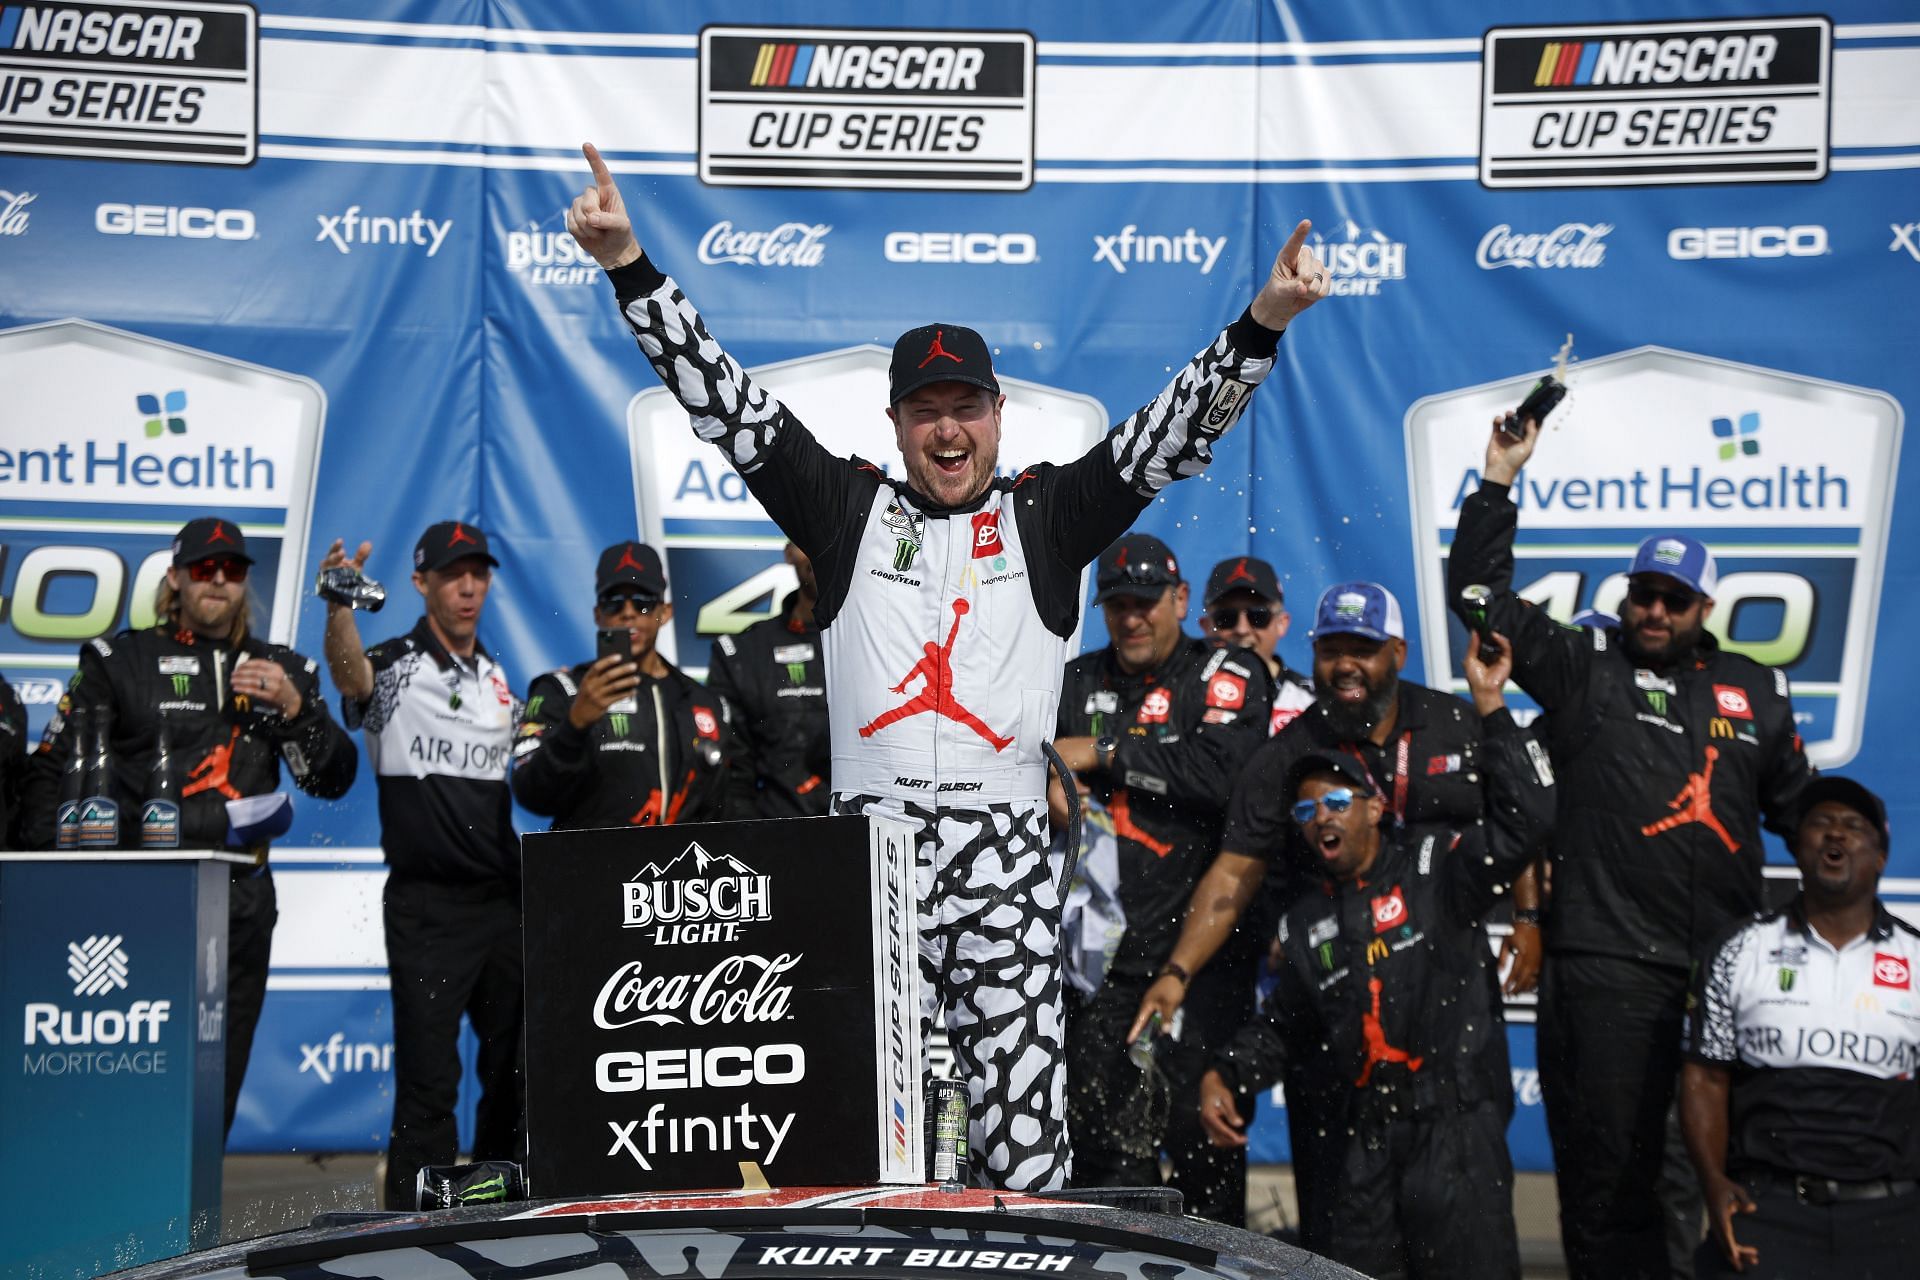 Kurt Busch celebrates in victory lane after winning the NASCAR Cup Series AdventHealth 400 at Kansas Speedway (Photo by Chris Graythen/Getty Images)